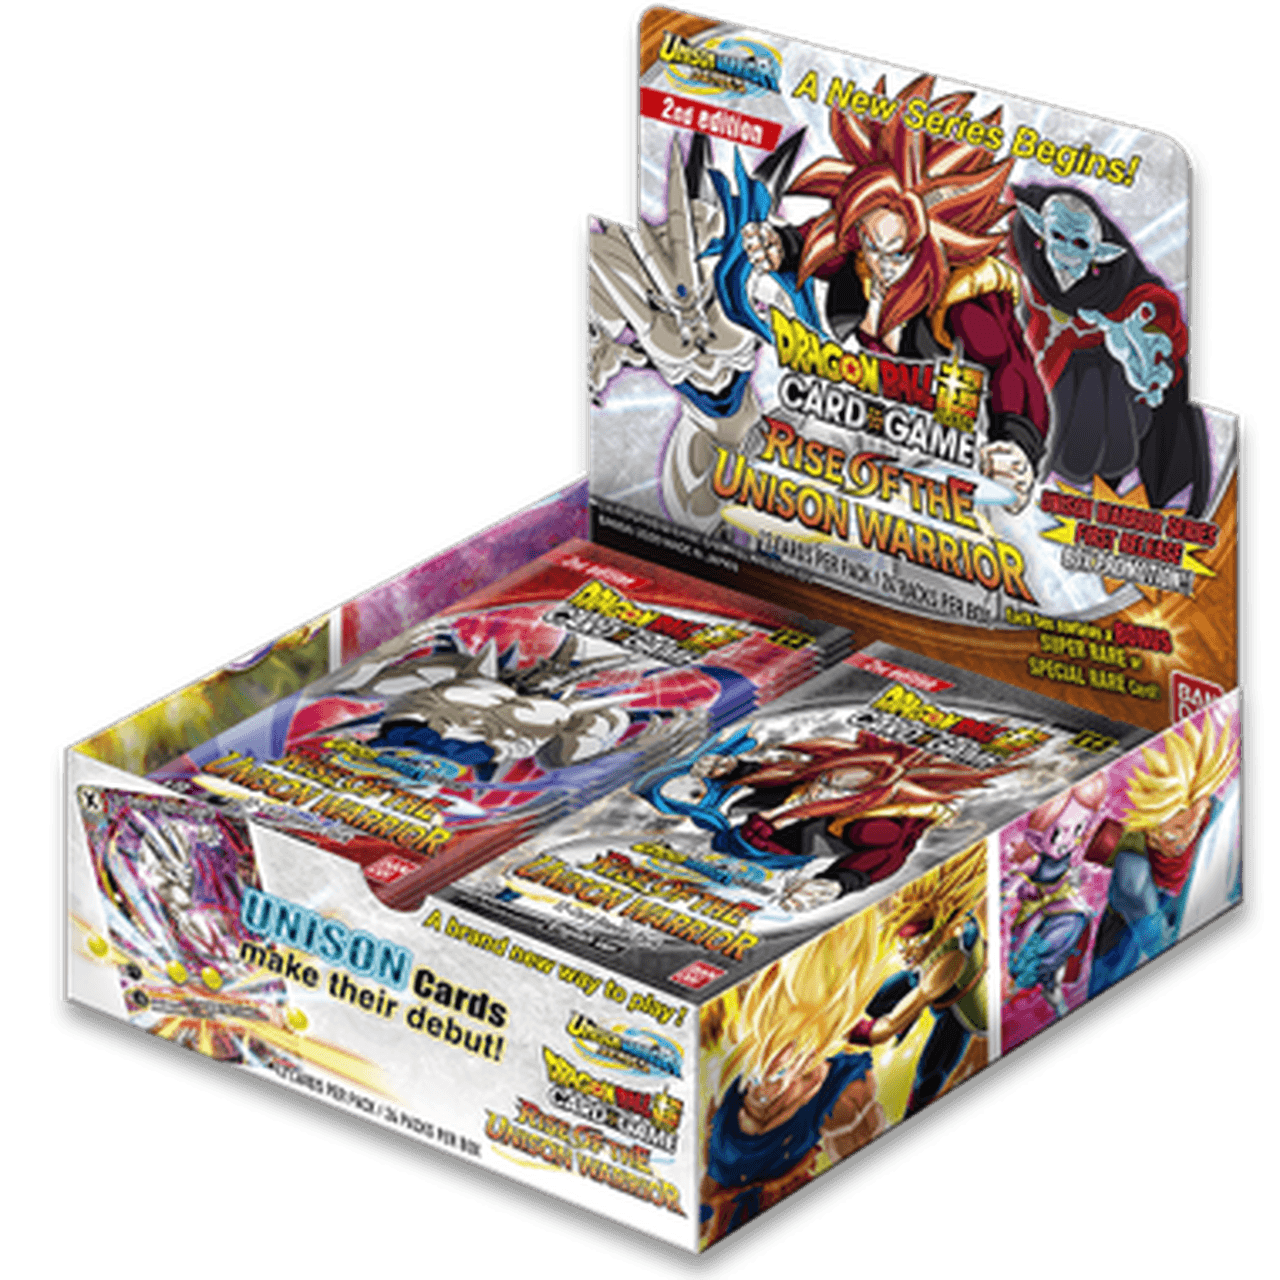 Dragon Ball Super – B10 Rise Of The Unison Warrior UW01 Booster Box (2nd Edition)